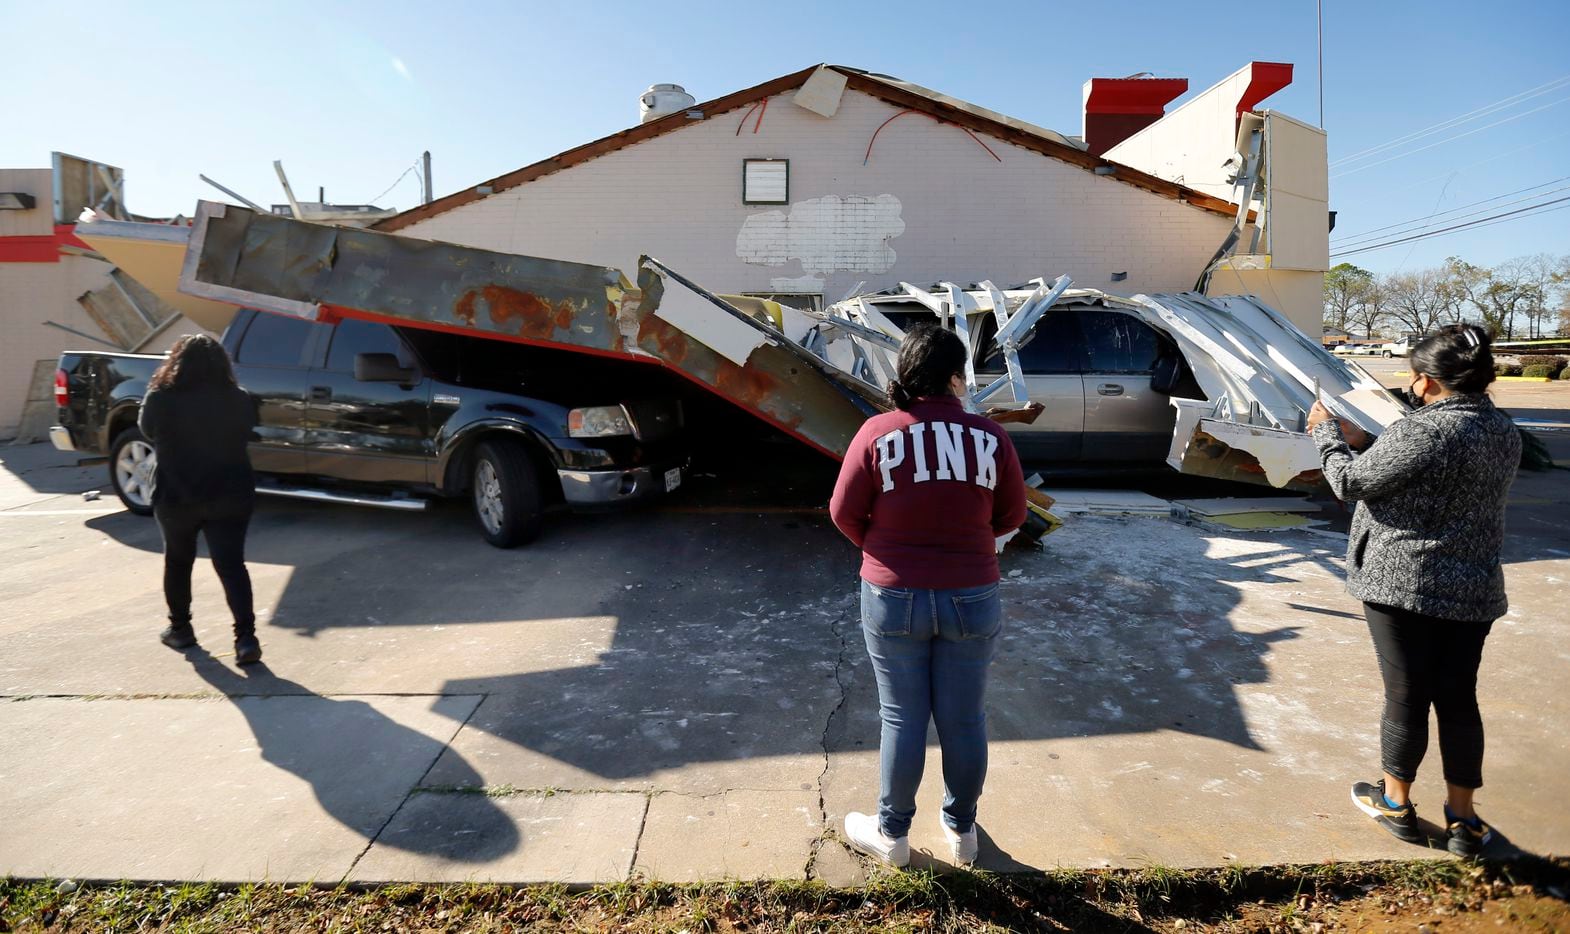 Burger Box restaurant employees (from left) Ana Espinoza, Jennifer Capado, and Maria Espinoza inspect the damage where two customers vehicles were trapped under the drive thru roof awning, Wednesday, November 24, 2020. A tornado-warned storm tore the roof off, trapping the drivers in their vehicles on S. Cooper St.